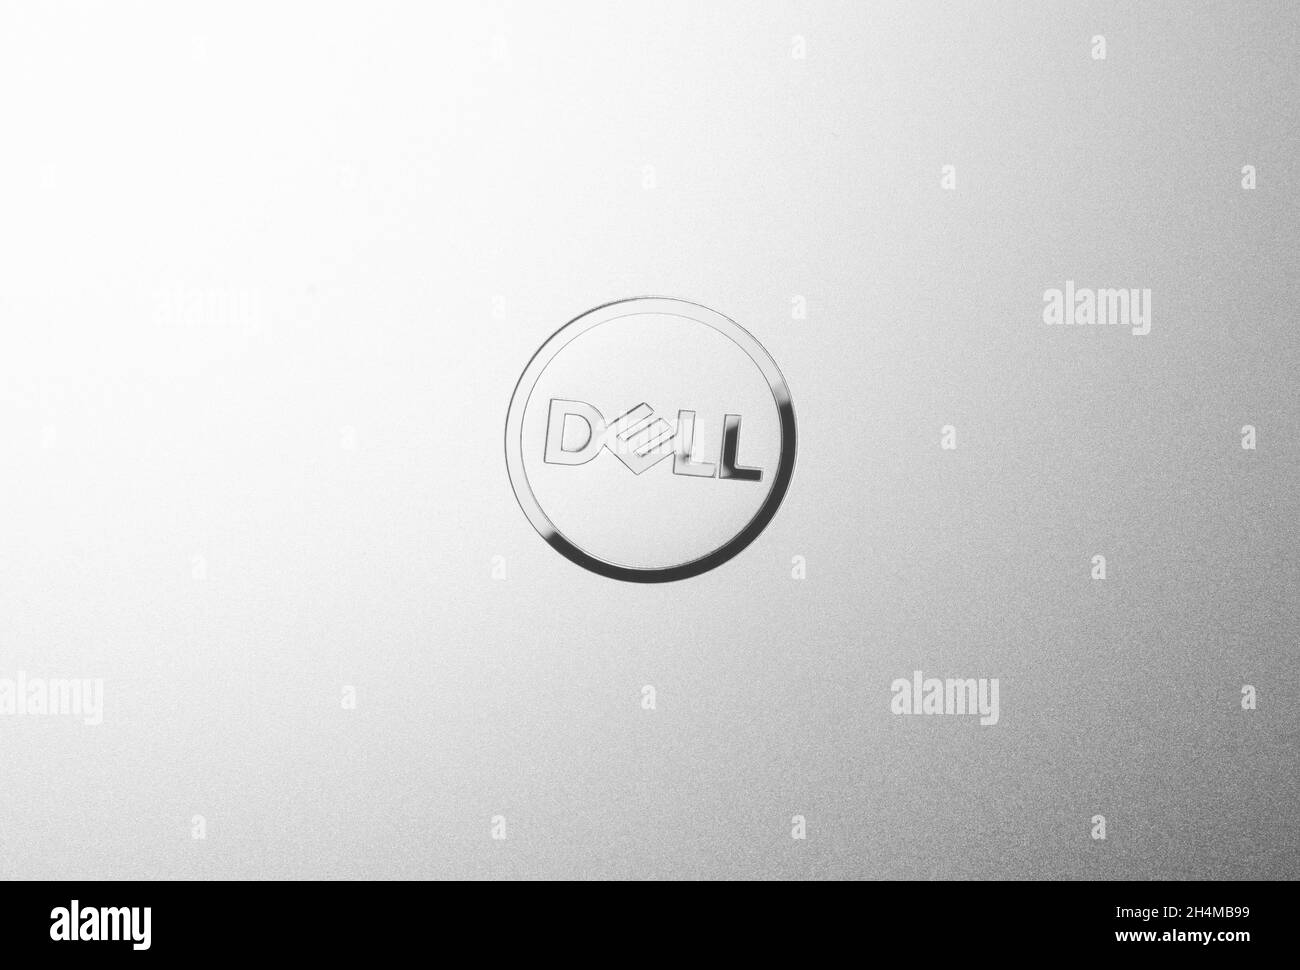 SAMARA, RUSSIA - September 13 2021 : Dell logo made from stainless steel on notebook Stock Photo